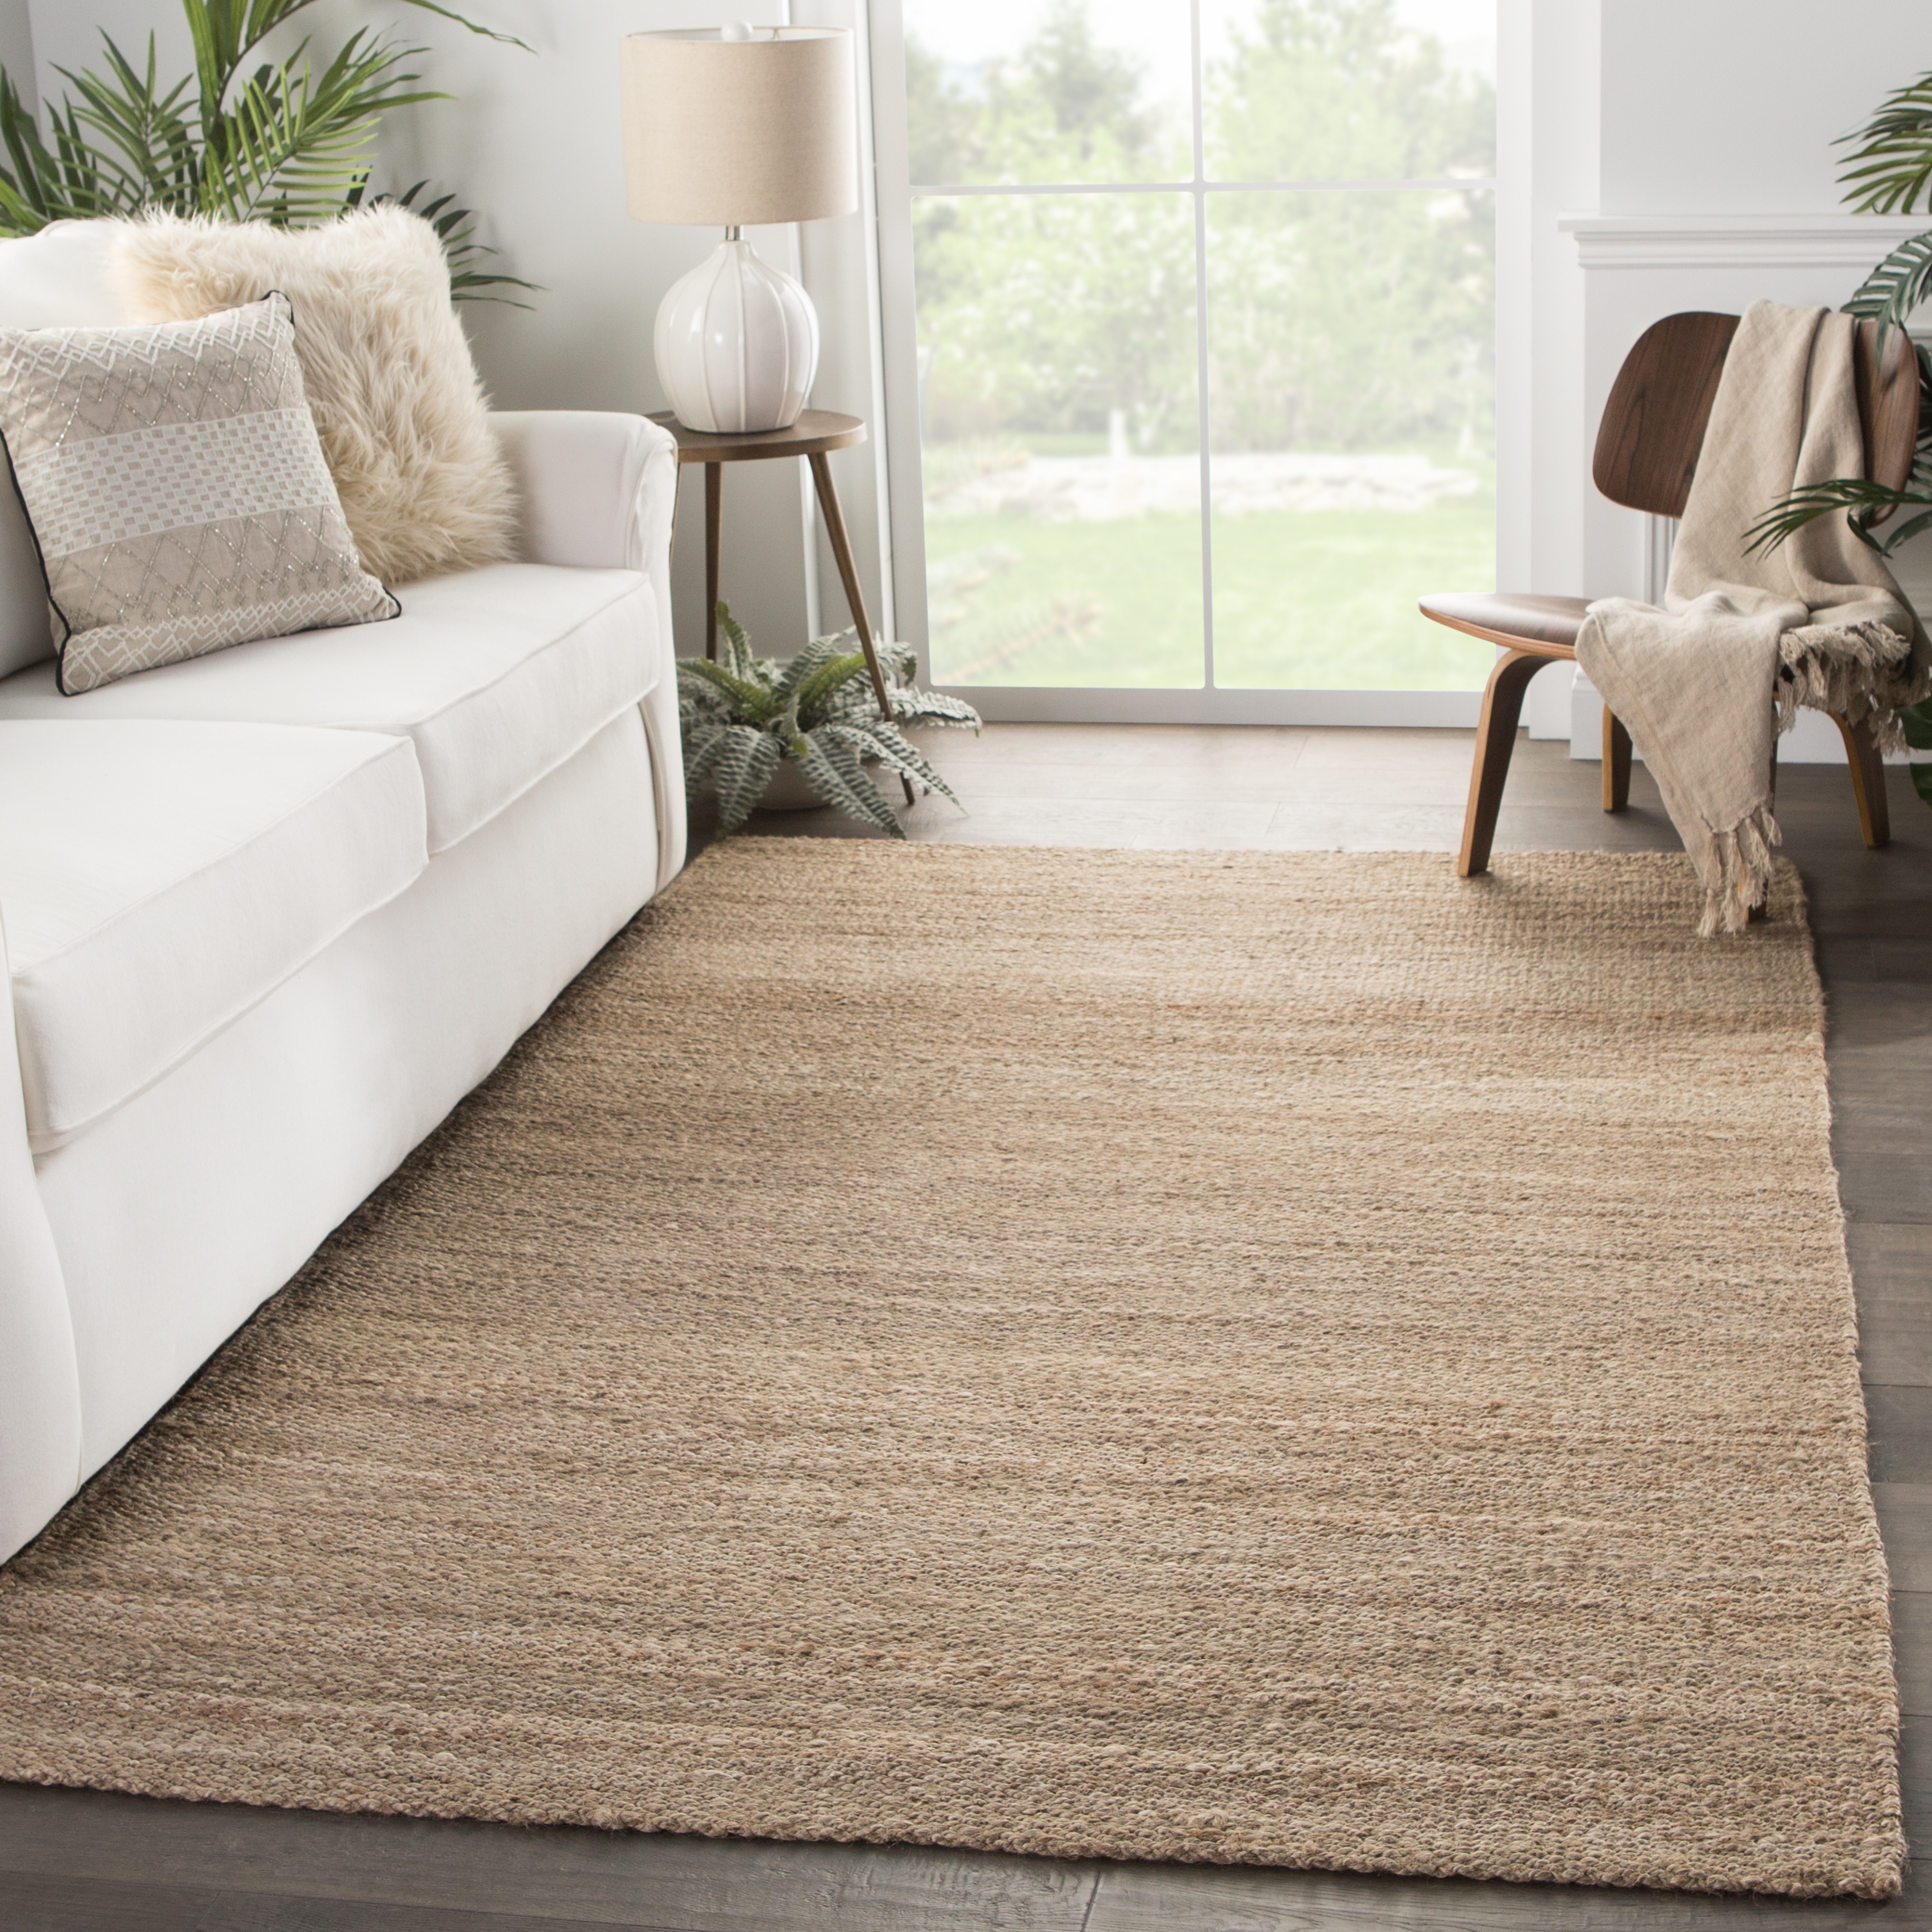 Hilo Natural Solid Tan Area Rug (5'X8') - Image 4